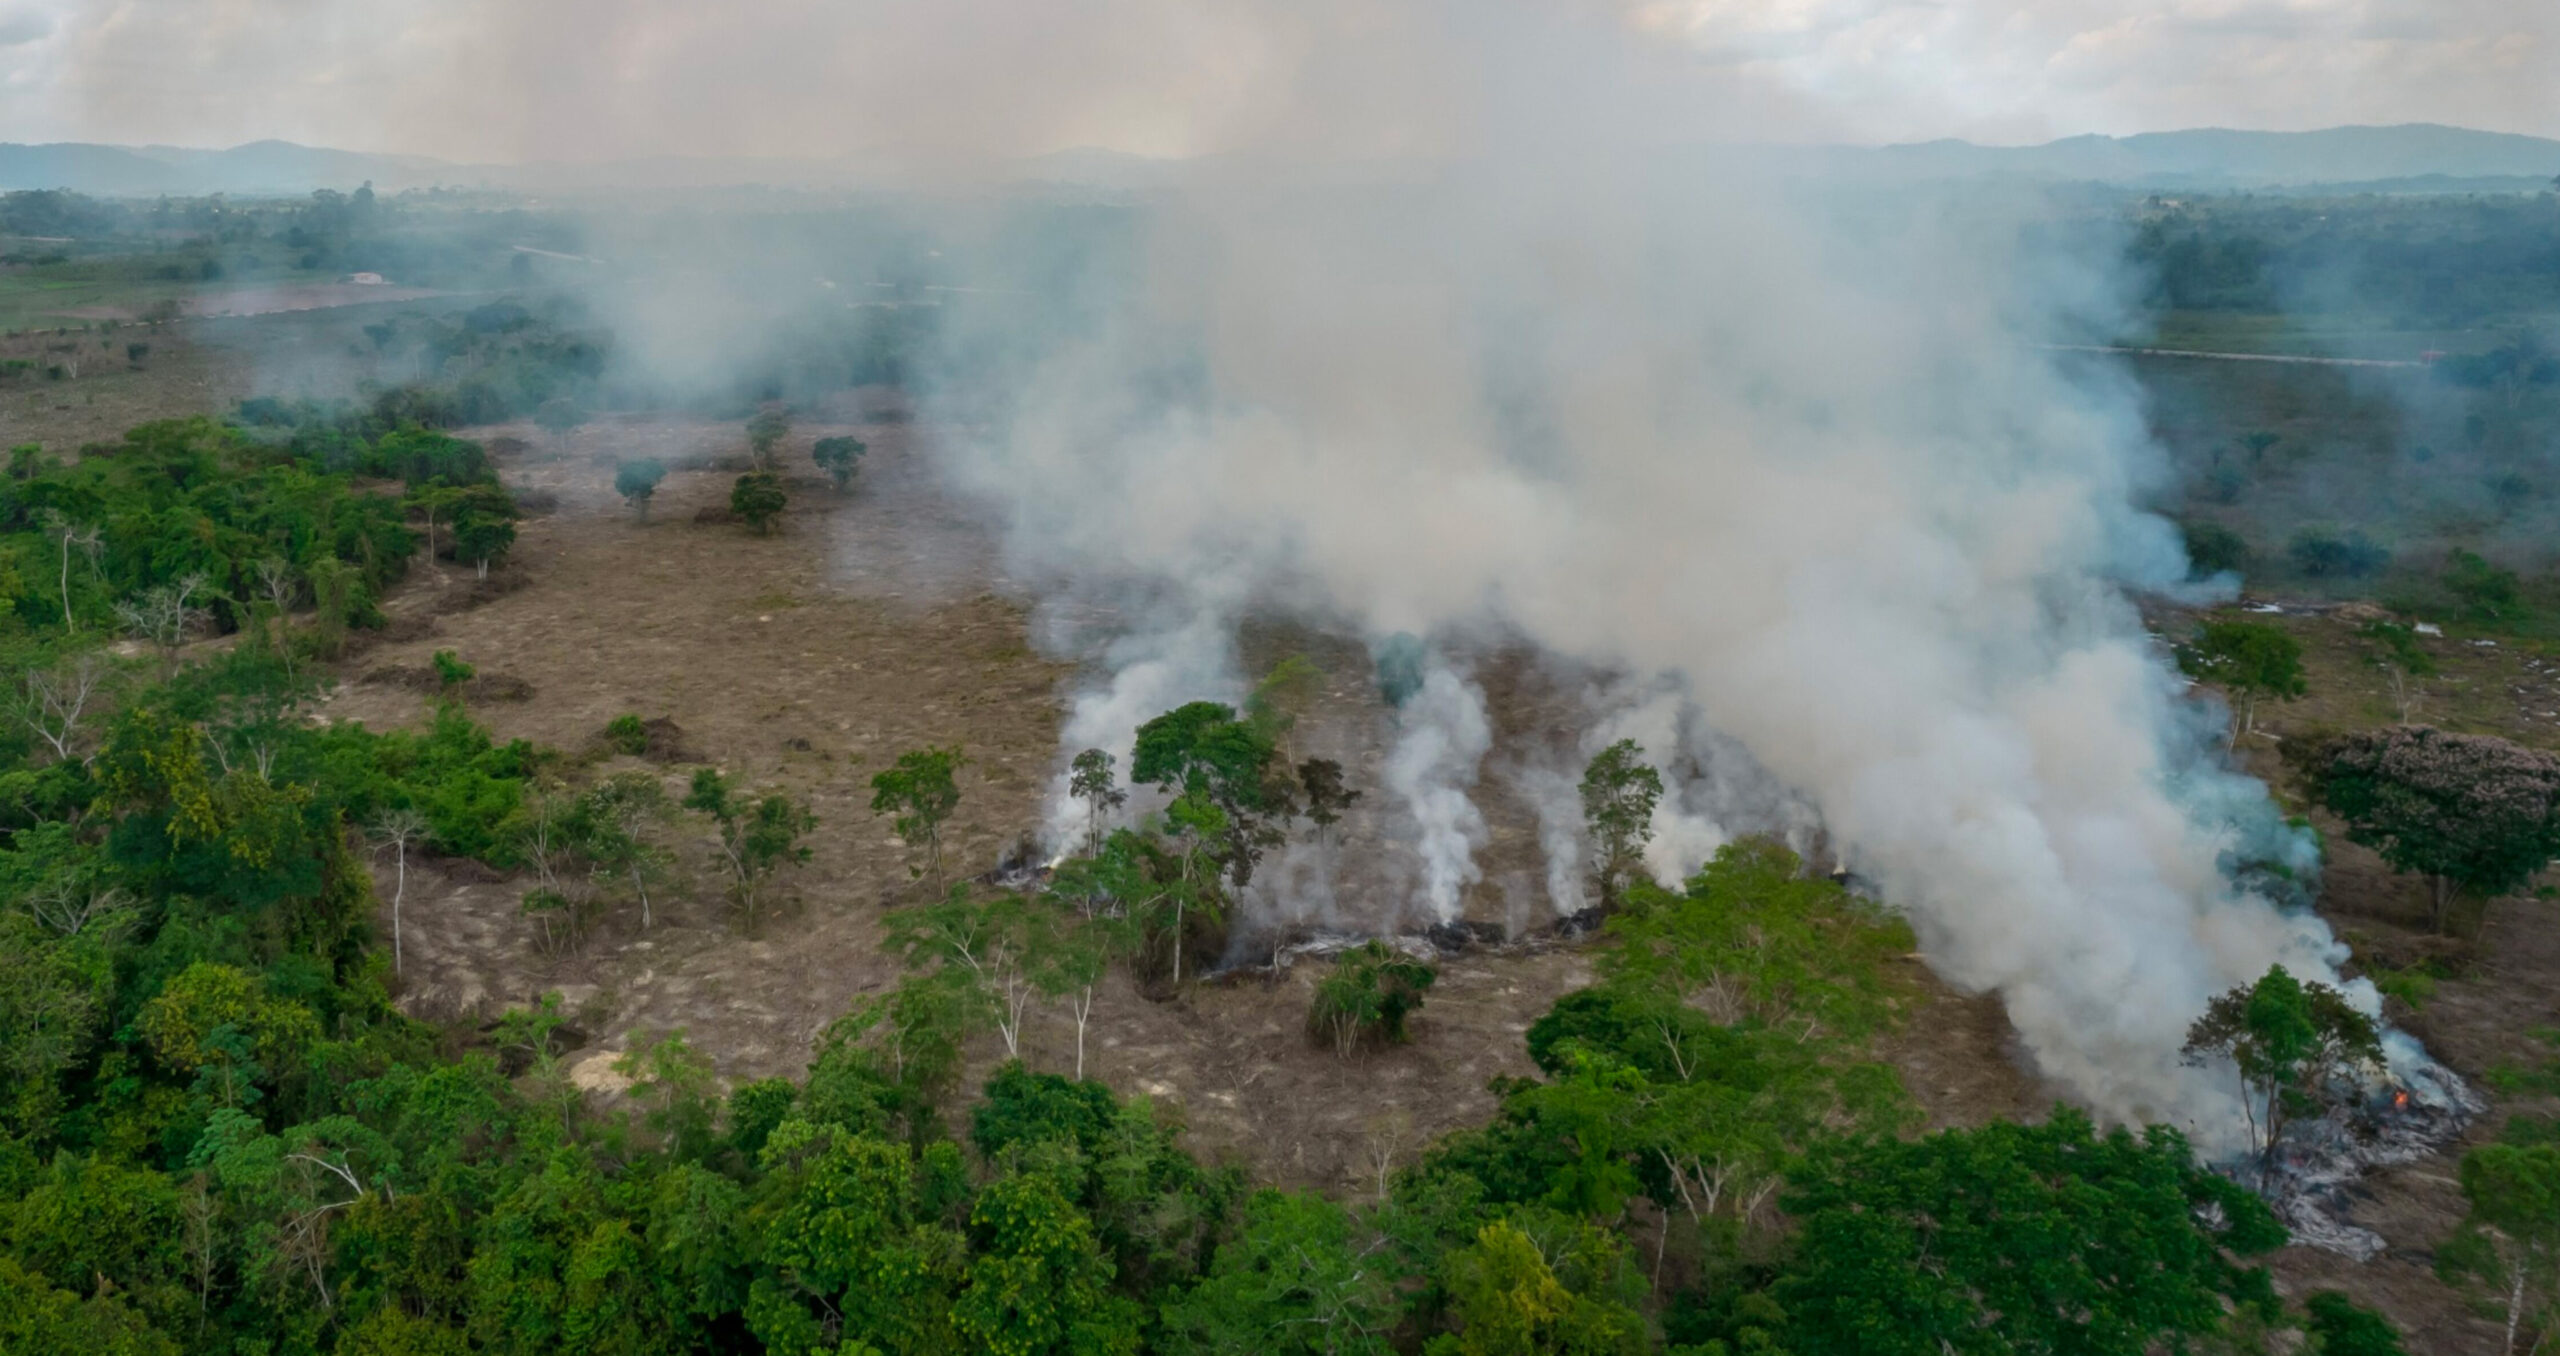 Fires burn Brazil’s Amazon rainforest. The Global Canopy report calls for tough legislation against deforestation, which it says also goes hand-in-hand with human rights abuses. (Photo: Jonne Roriz/Bloomberg) 